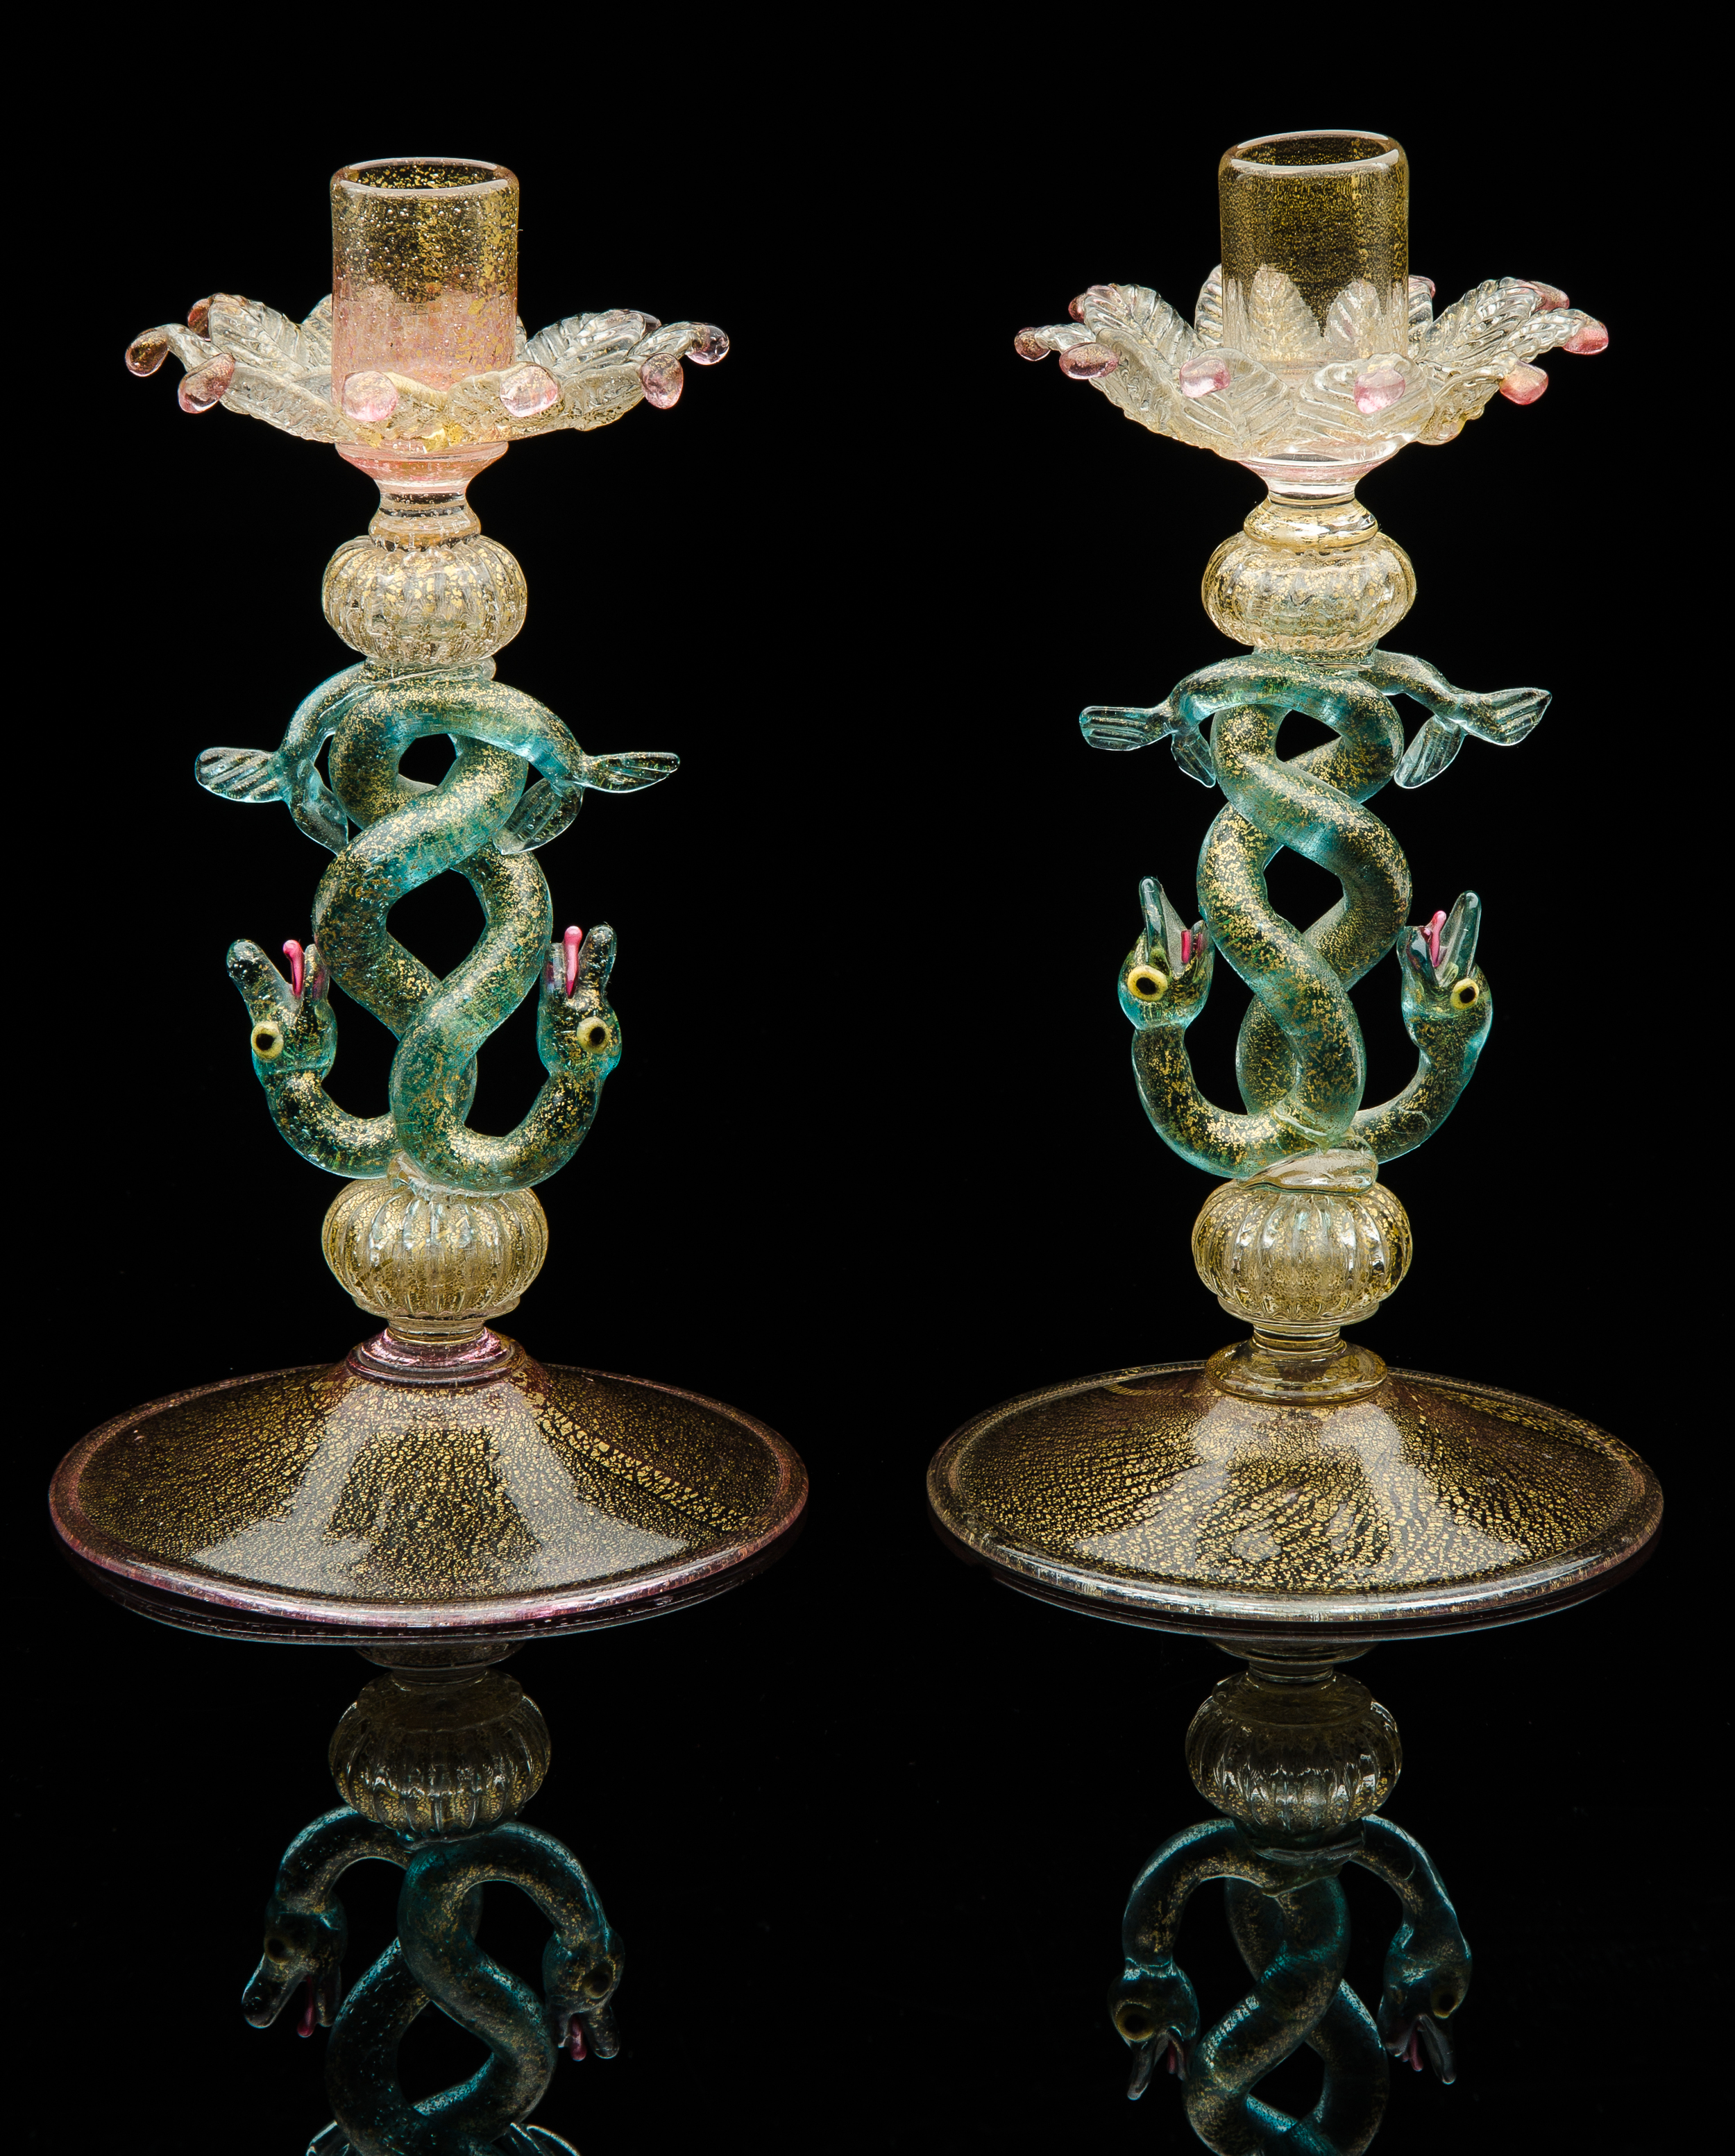  Salviati and Company,&nbsp; Pair of Aventurine Candlesticks with Double Serpent Stems&nbsp; (glass), VV.334.1-.2 